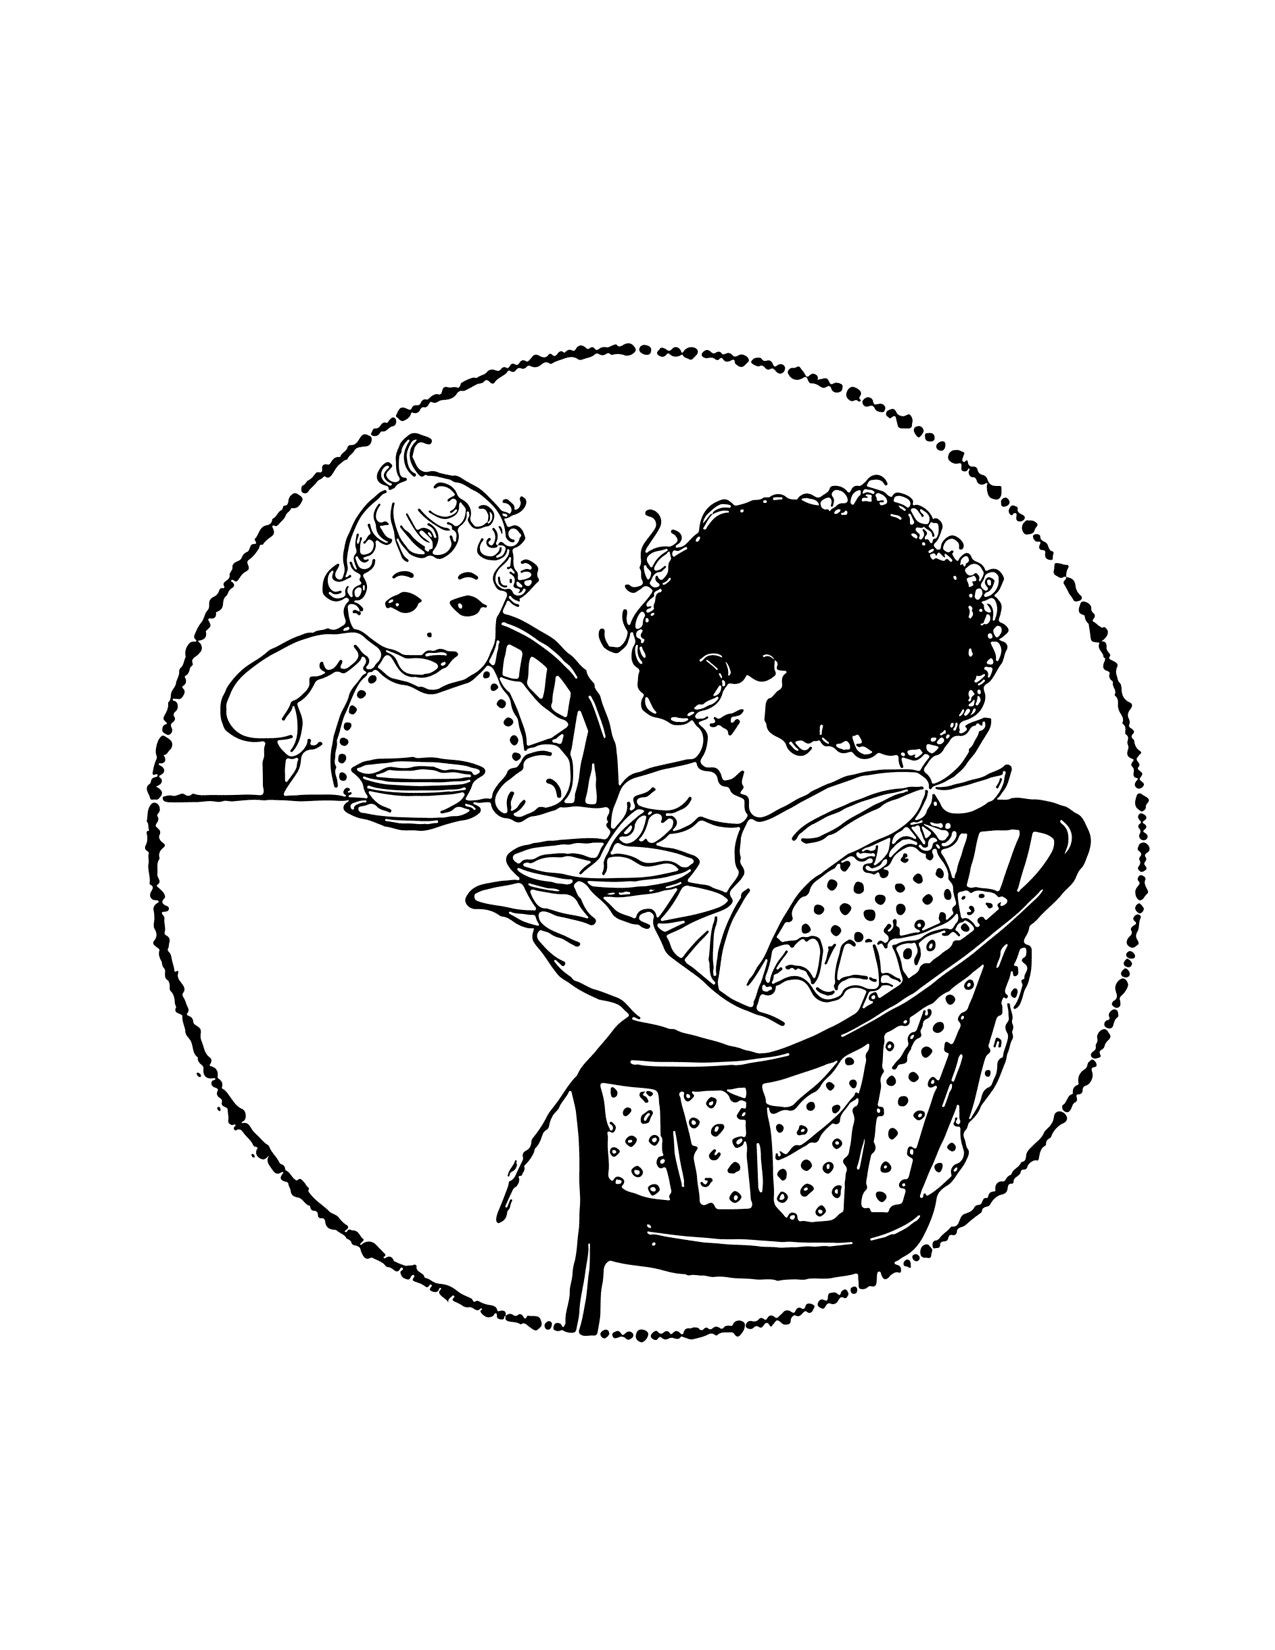 Children Eating Breakfast Coloring Page